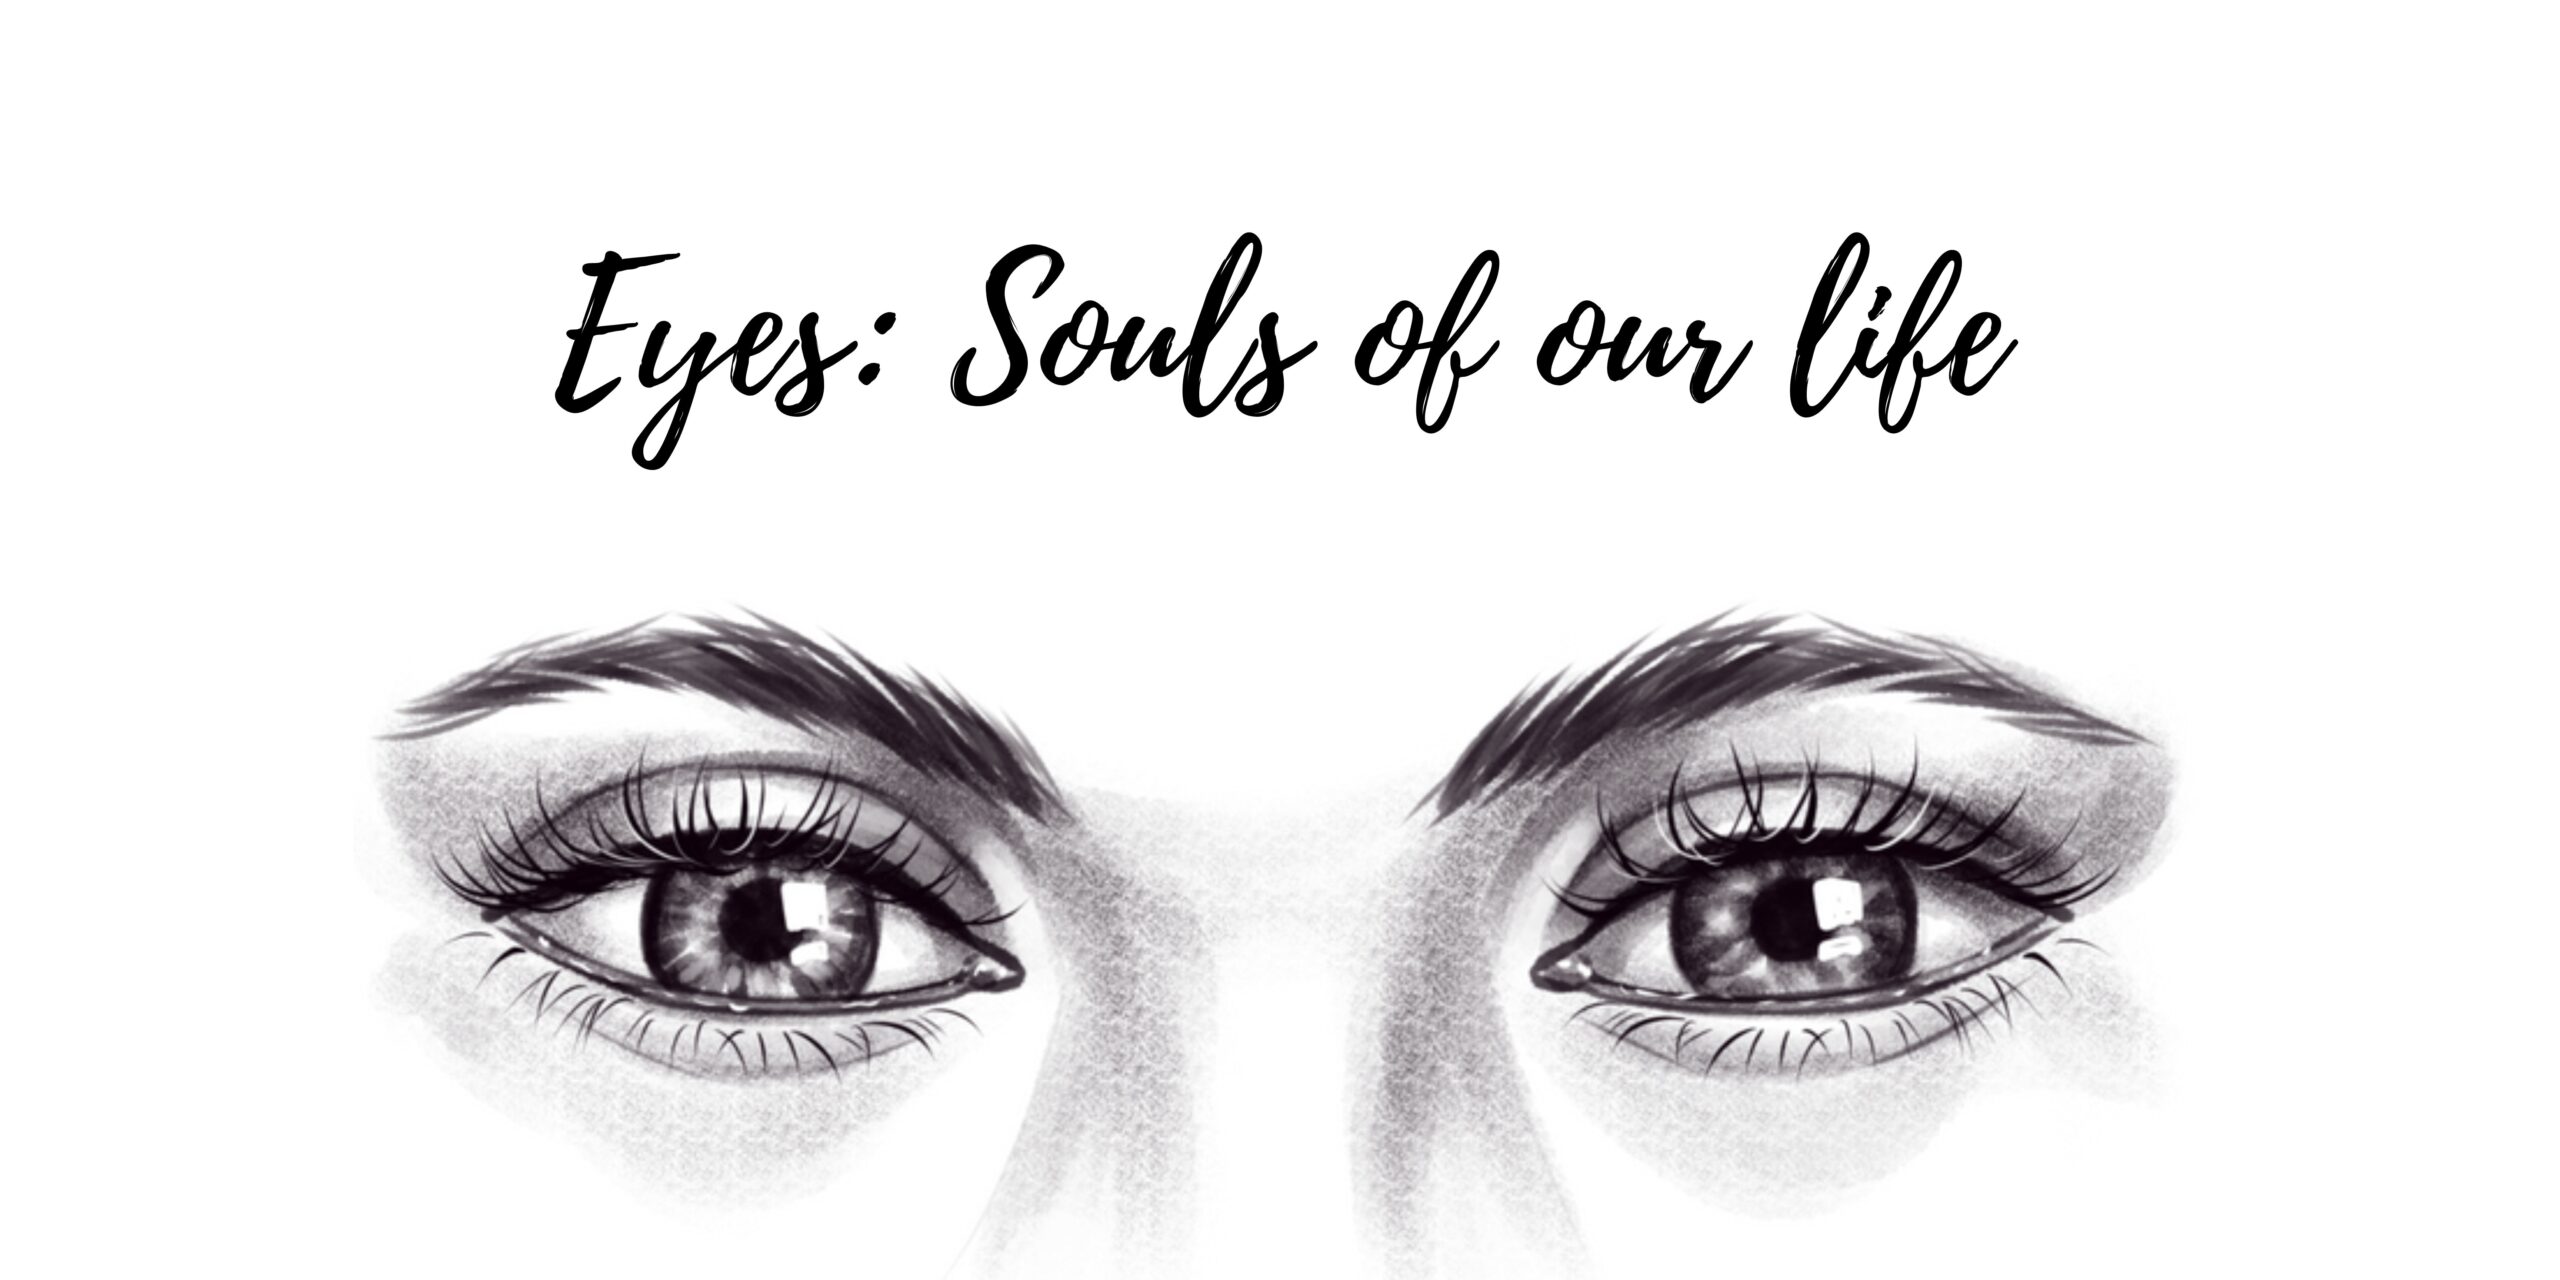 Eyes: Souls of our life!